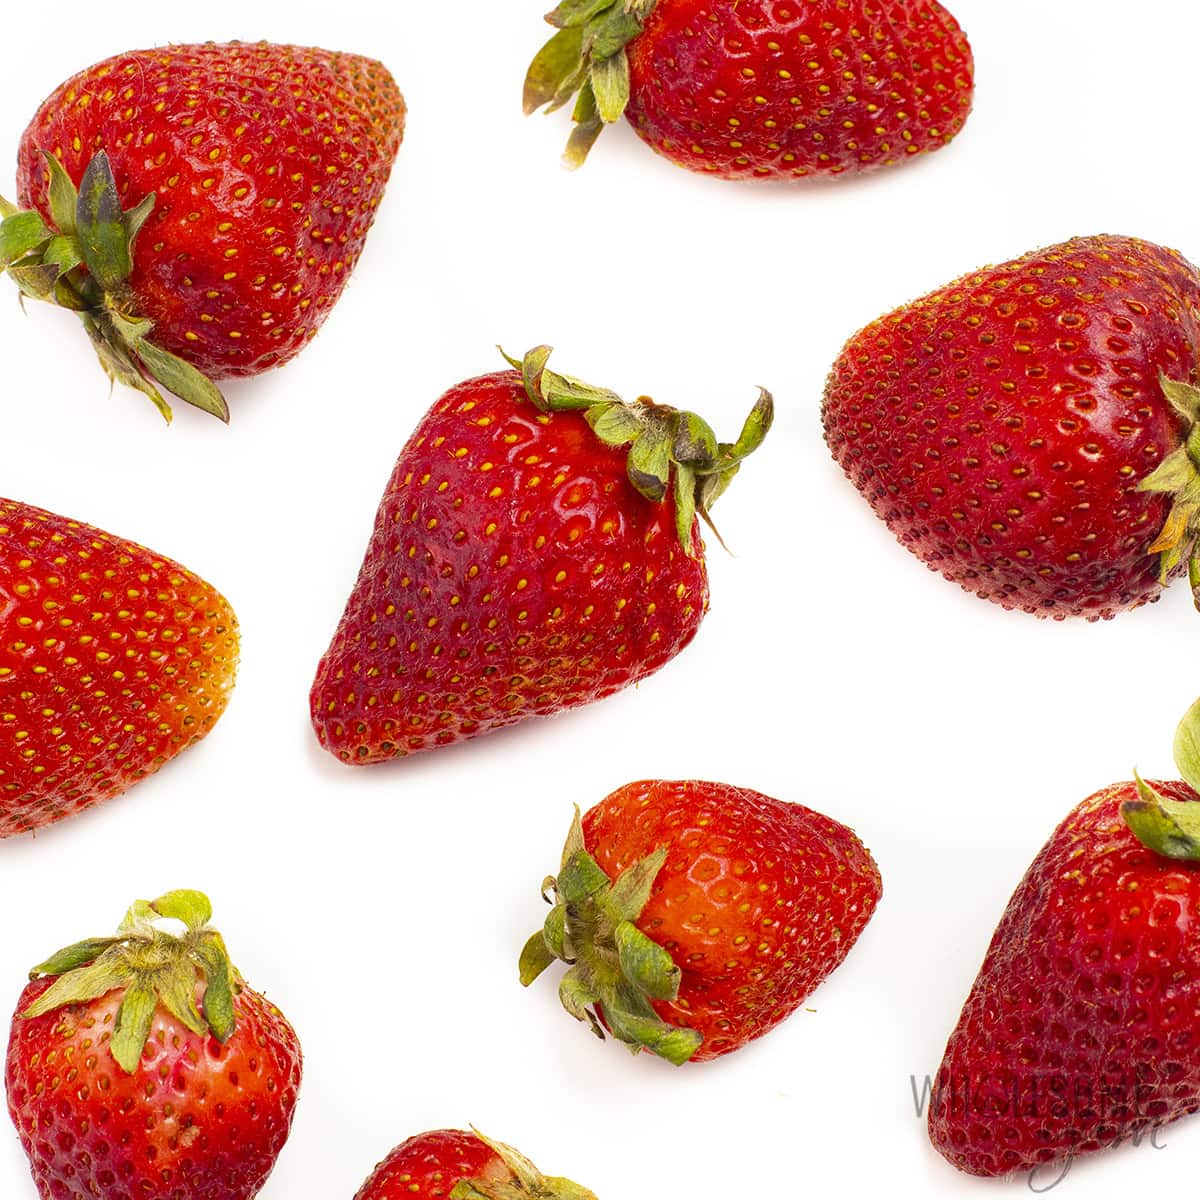 Are strawberries keto? Carbs in strawberries are low, including the fresh ones shown here.